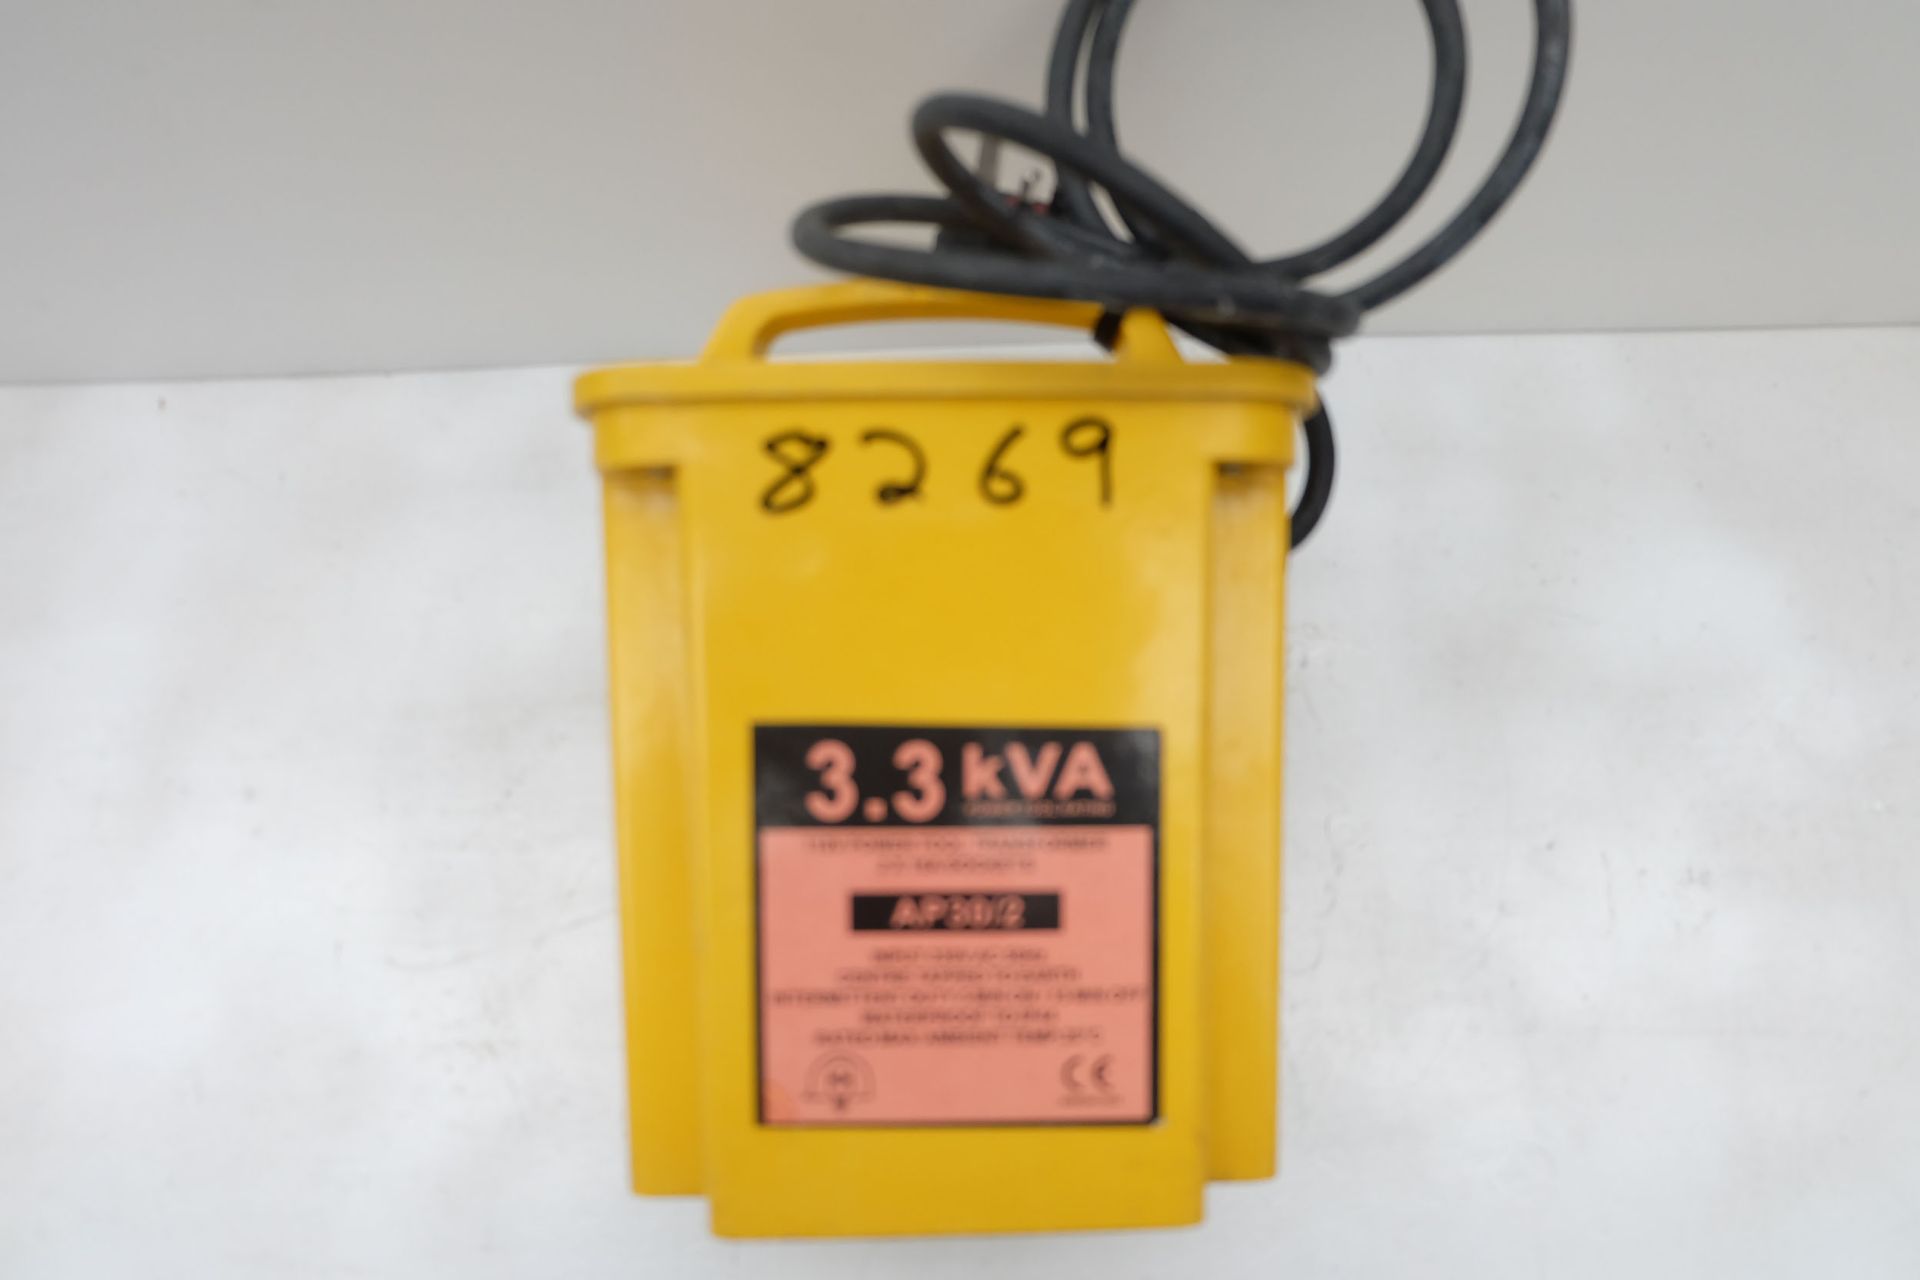 240V to 110V Double Socket Power Tool Step Down Transformer. - Image 6 of 6